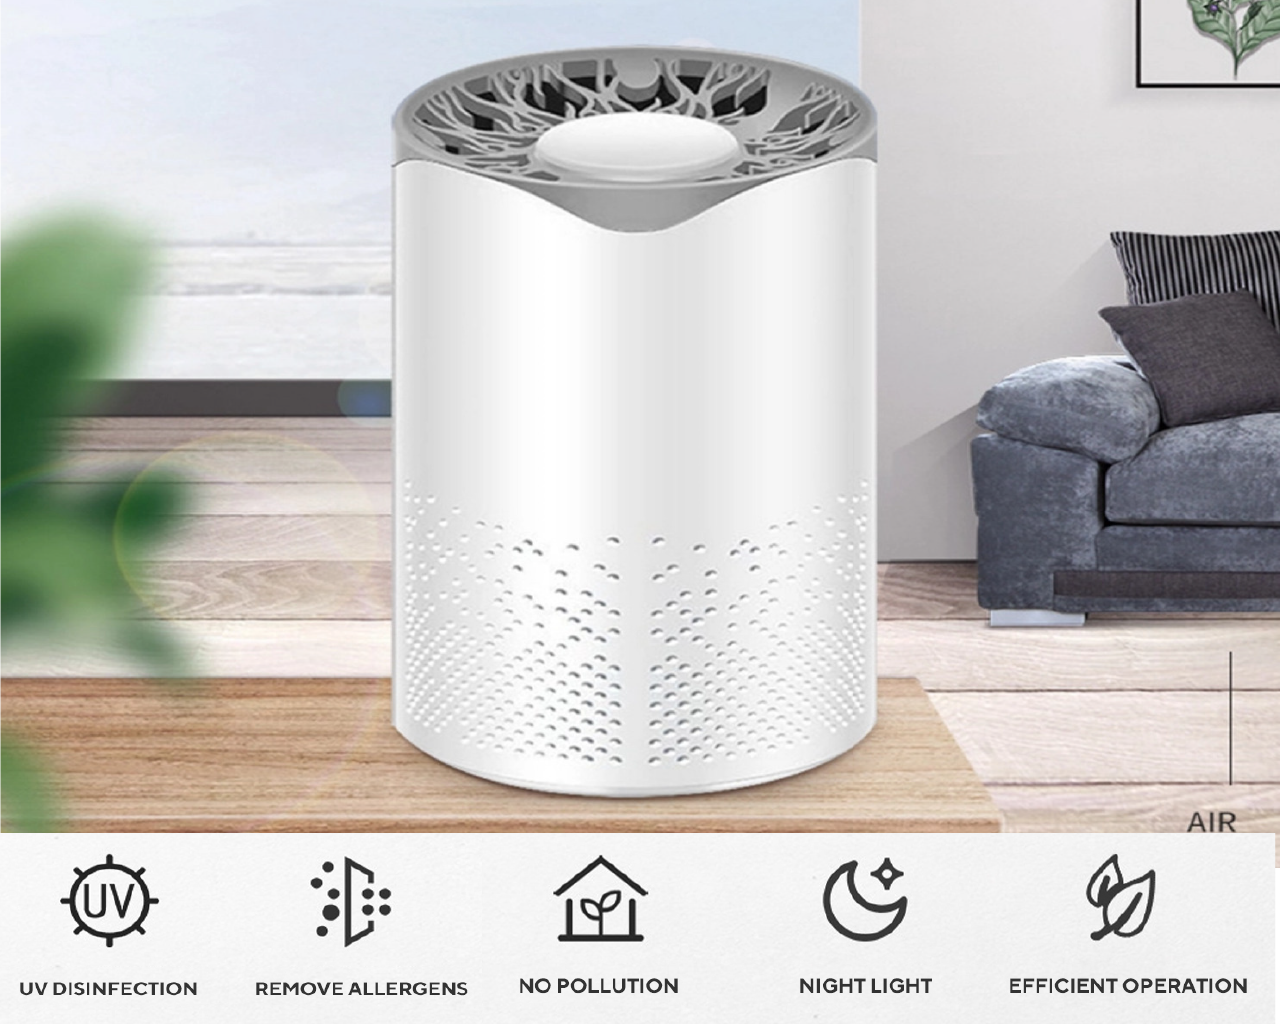 P - UV Air Purifier 4 Layer HEPA Filter ultraviolet light air cleaner portable room size